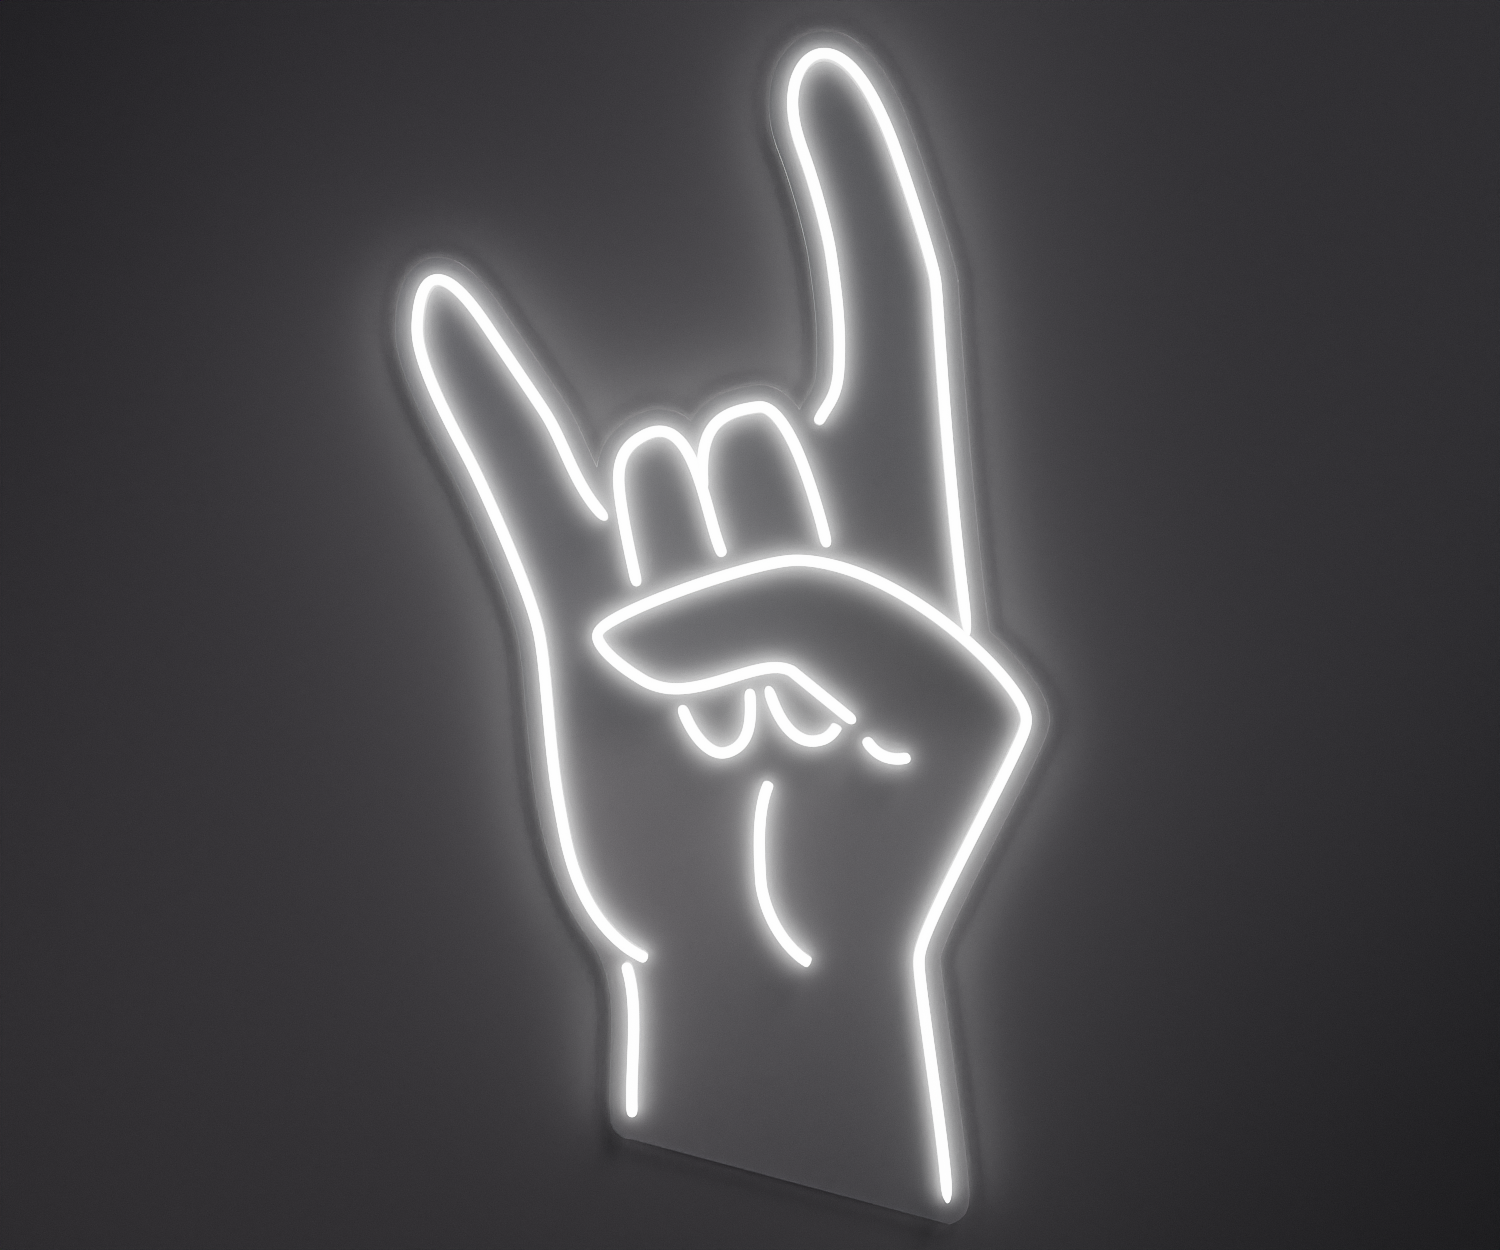 white neon sign of a rock hand